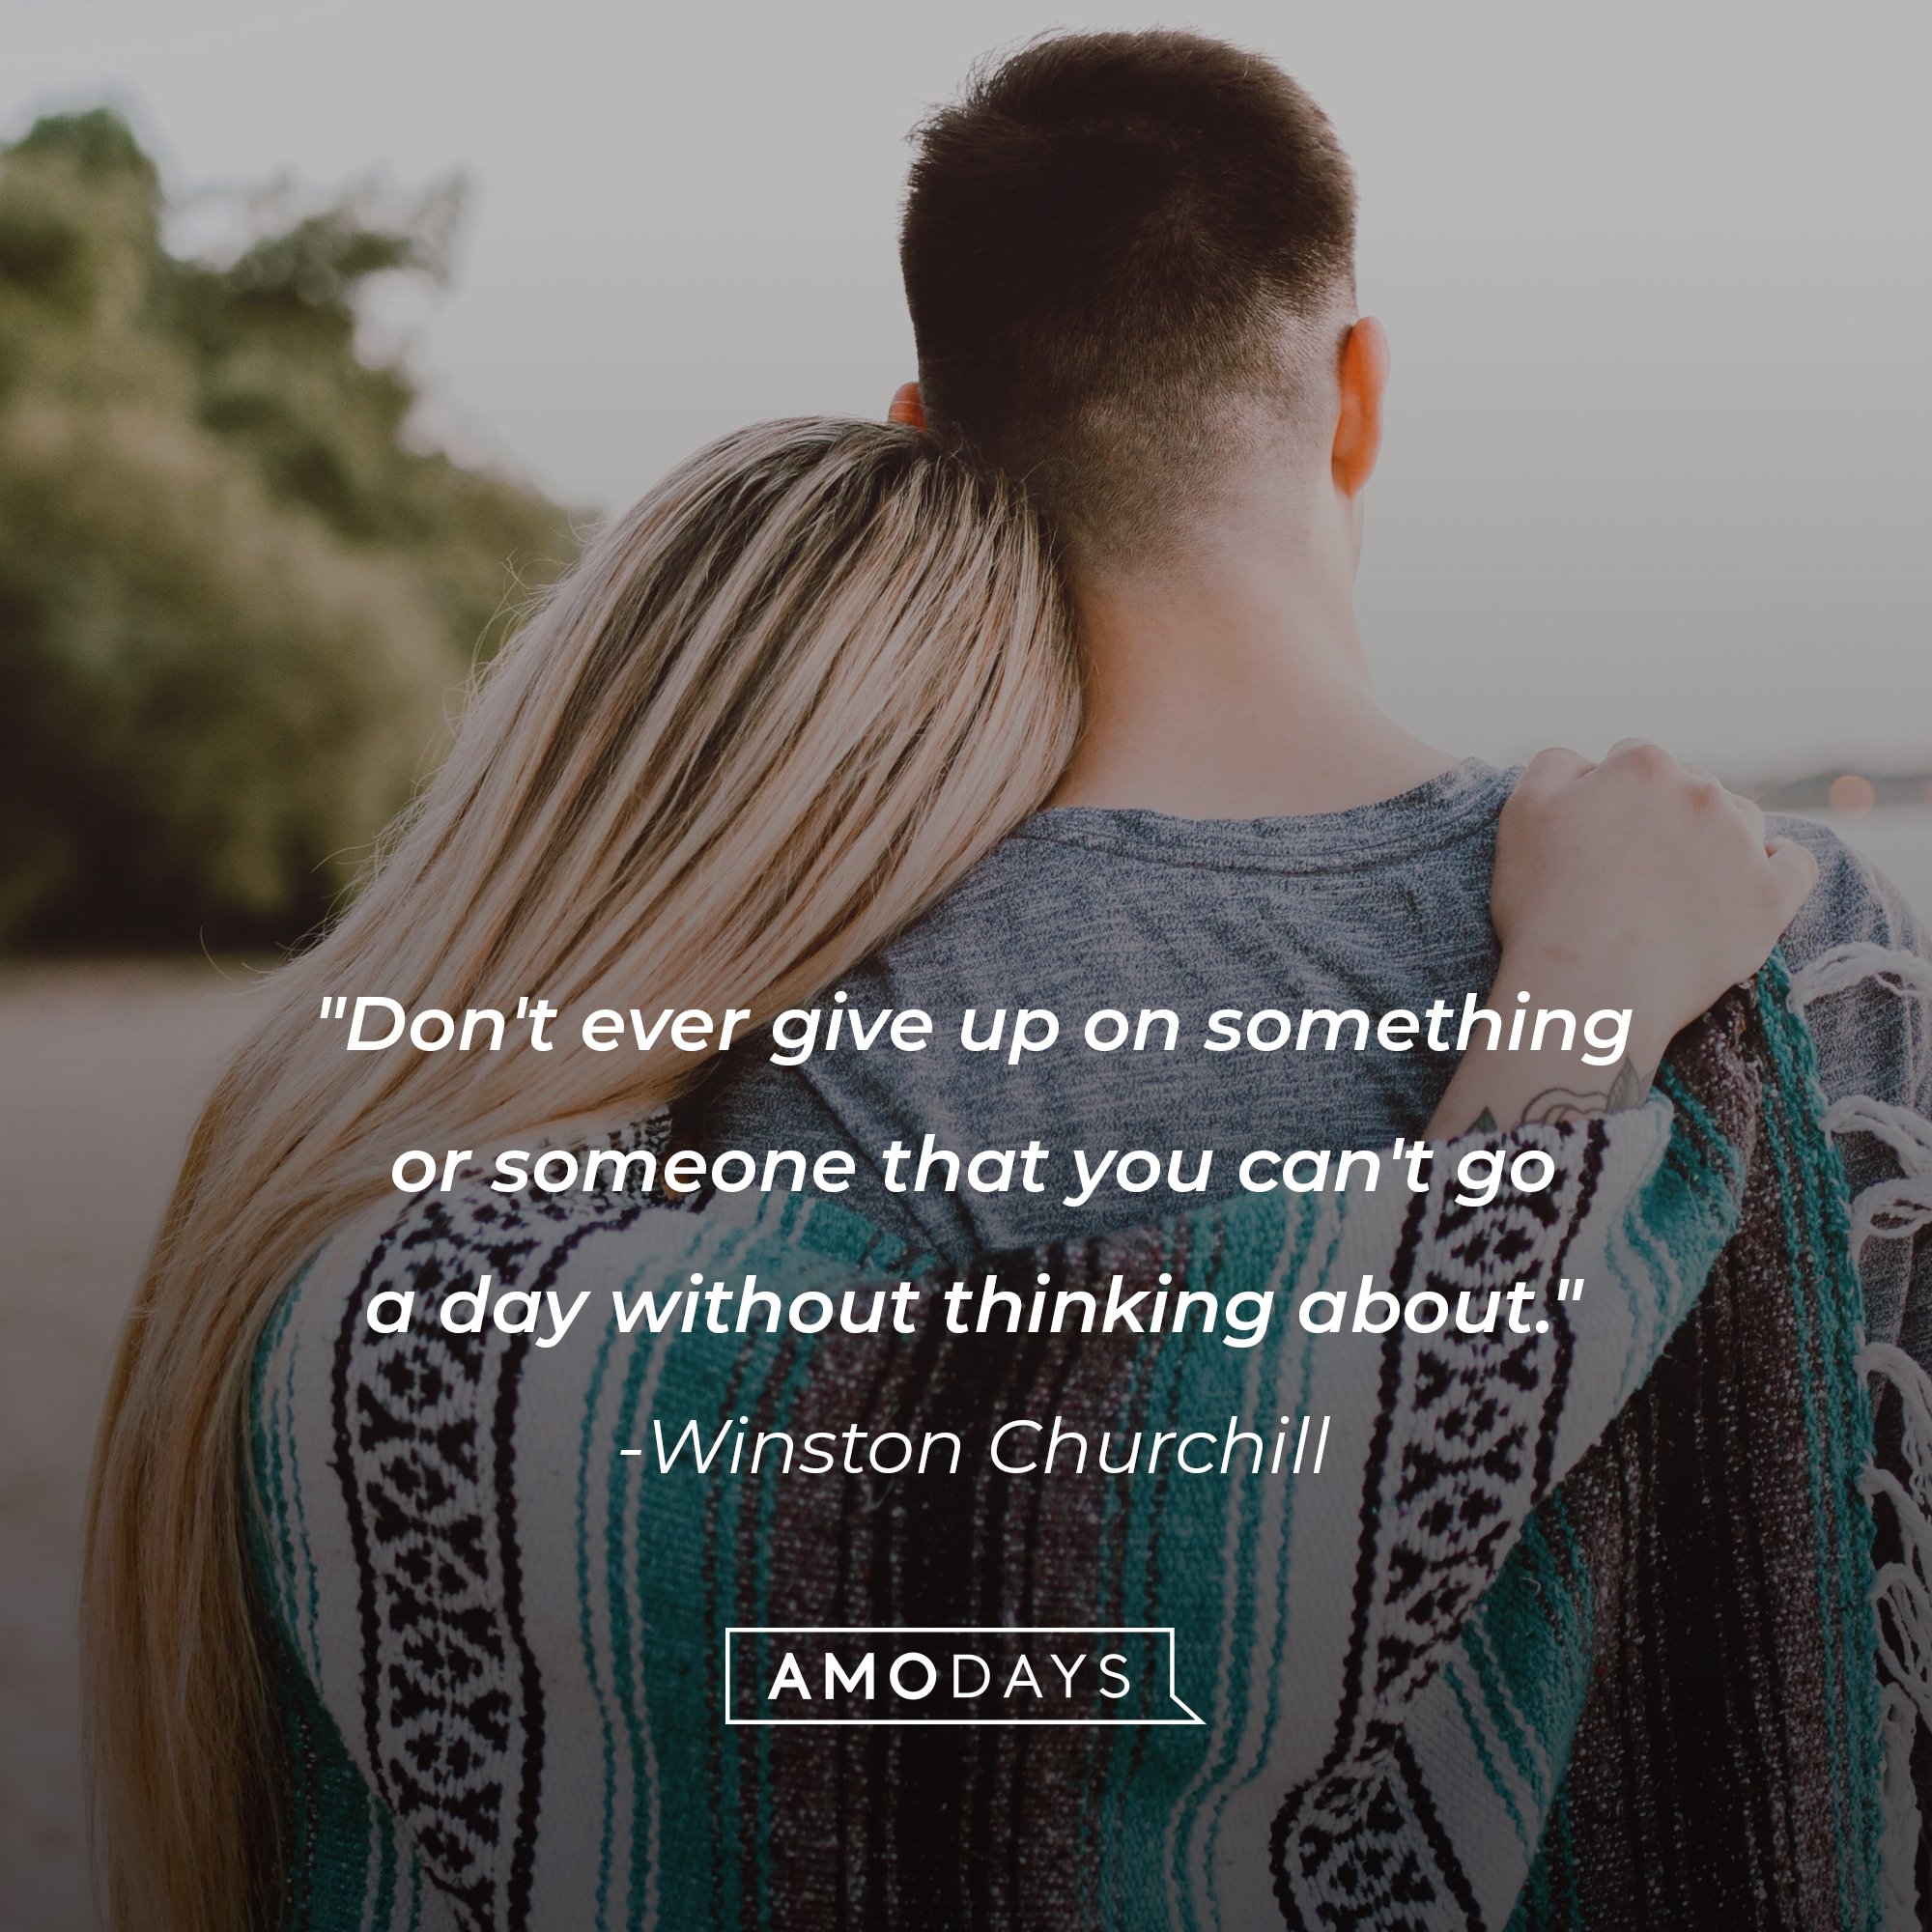 Winston Churchill’s quote: "Don't ever give up on something or someone that you can't go a day without thinking about." | Image: AmoDays 